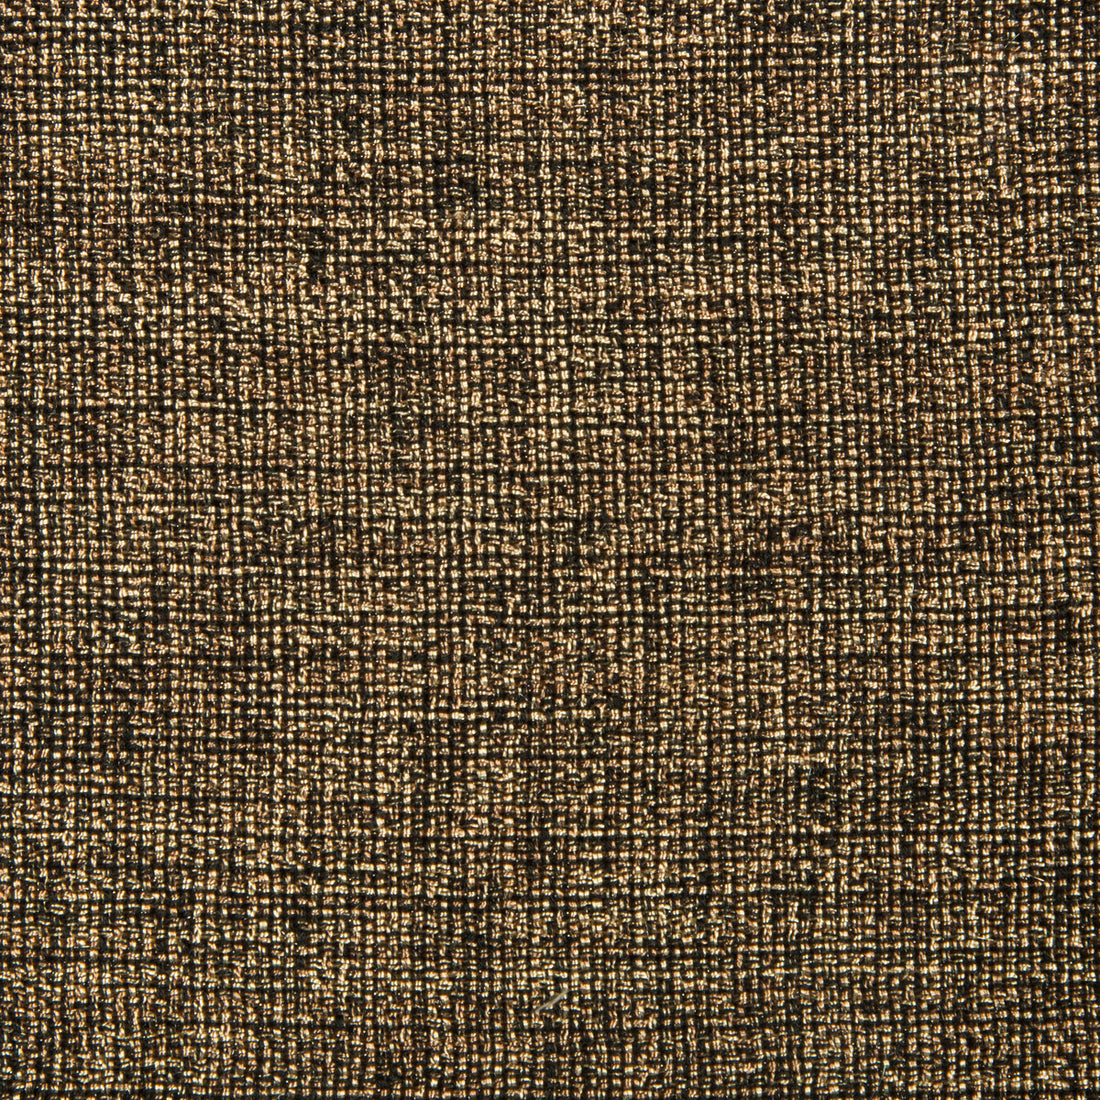 Kravet Contract fabric in 34926-814 color - pattern 34926.814.0 - by Kravet Contract